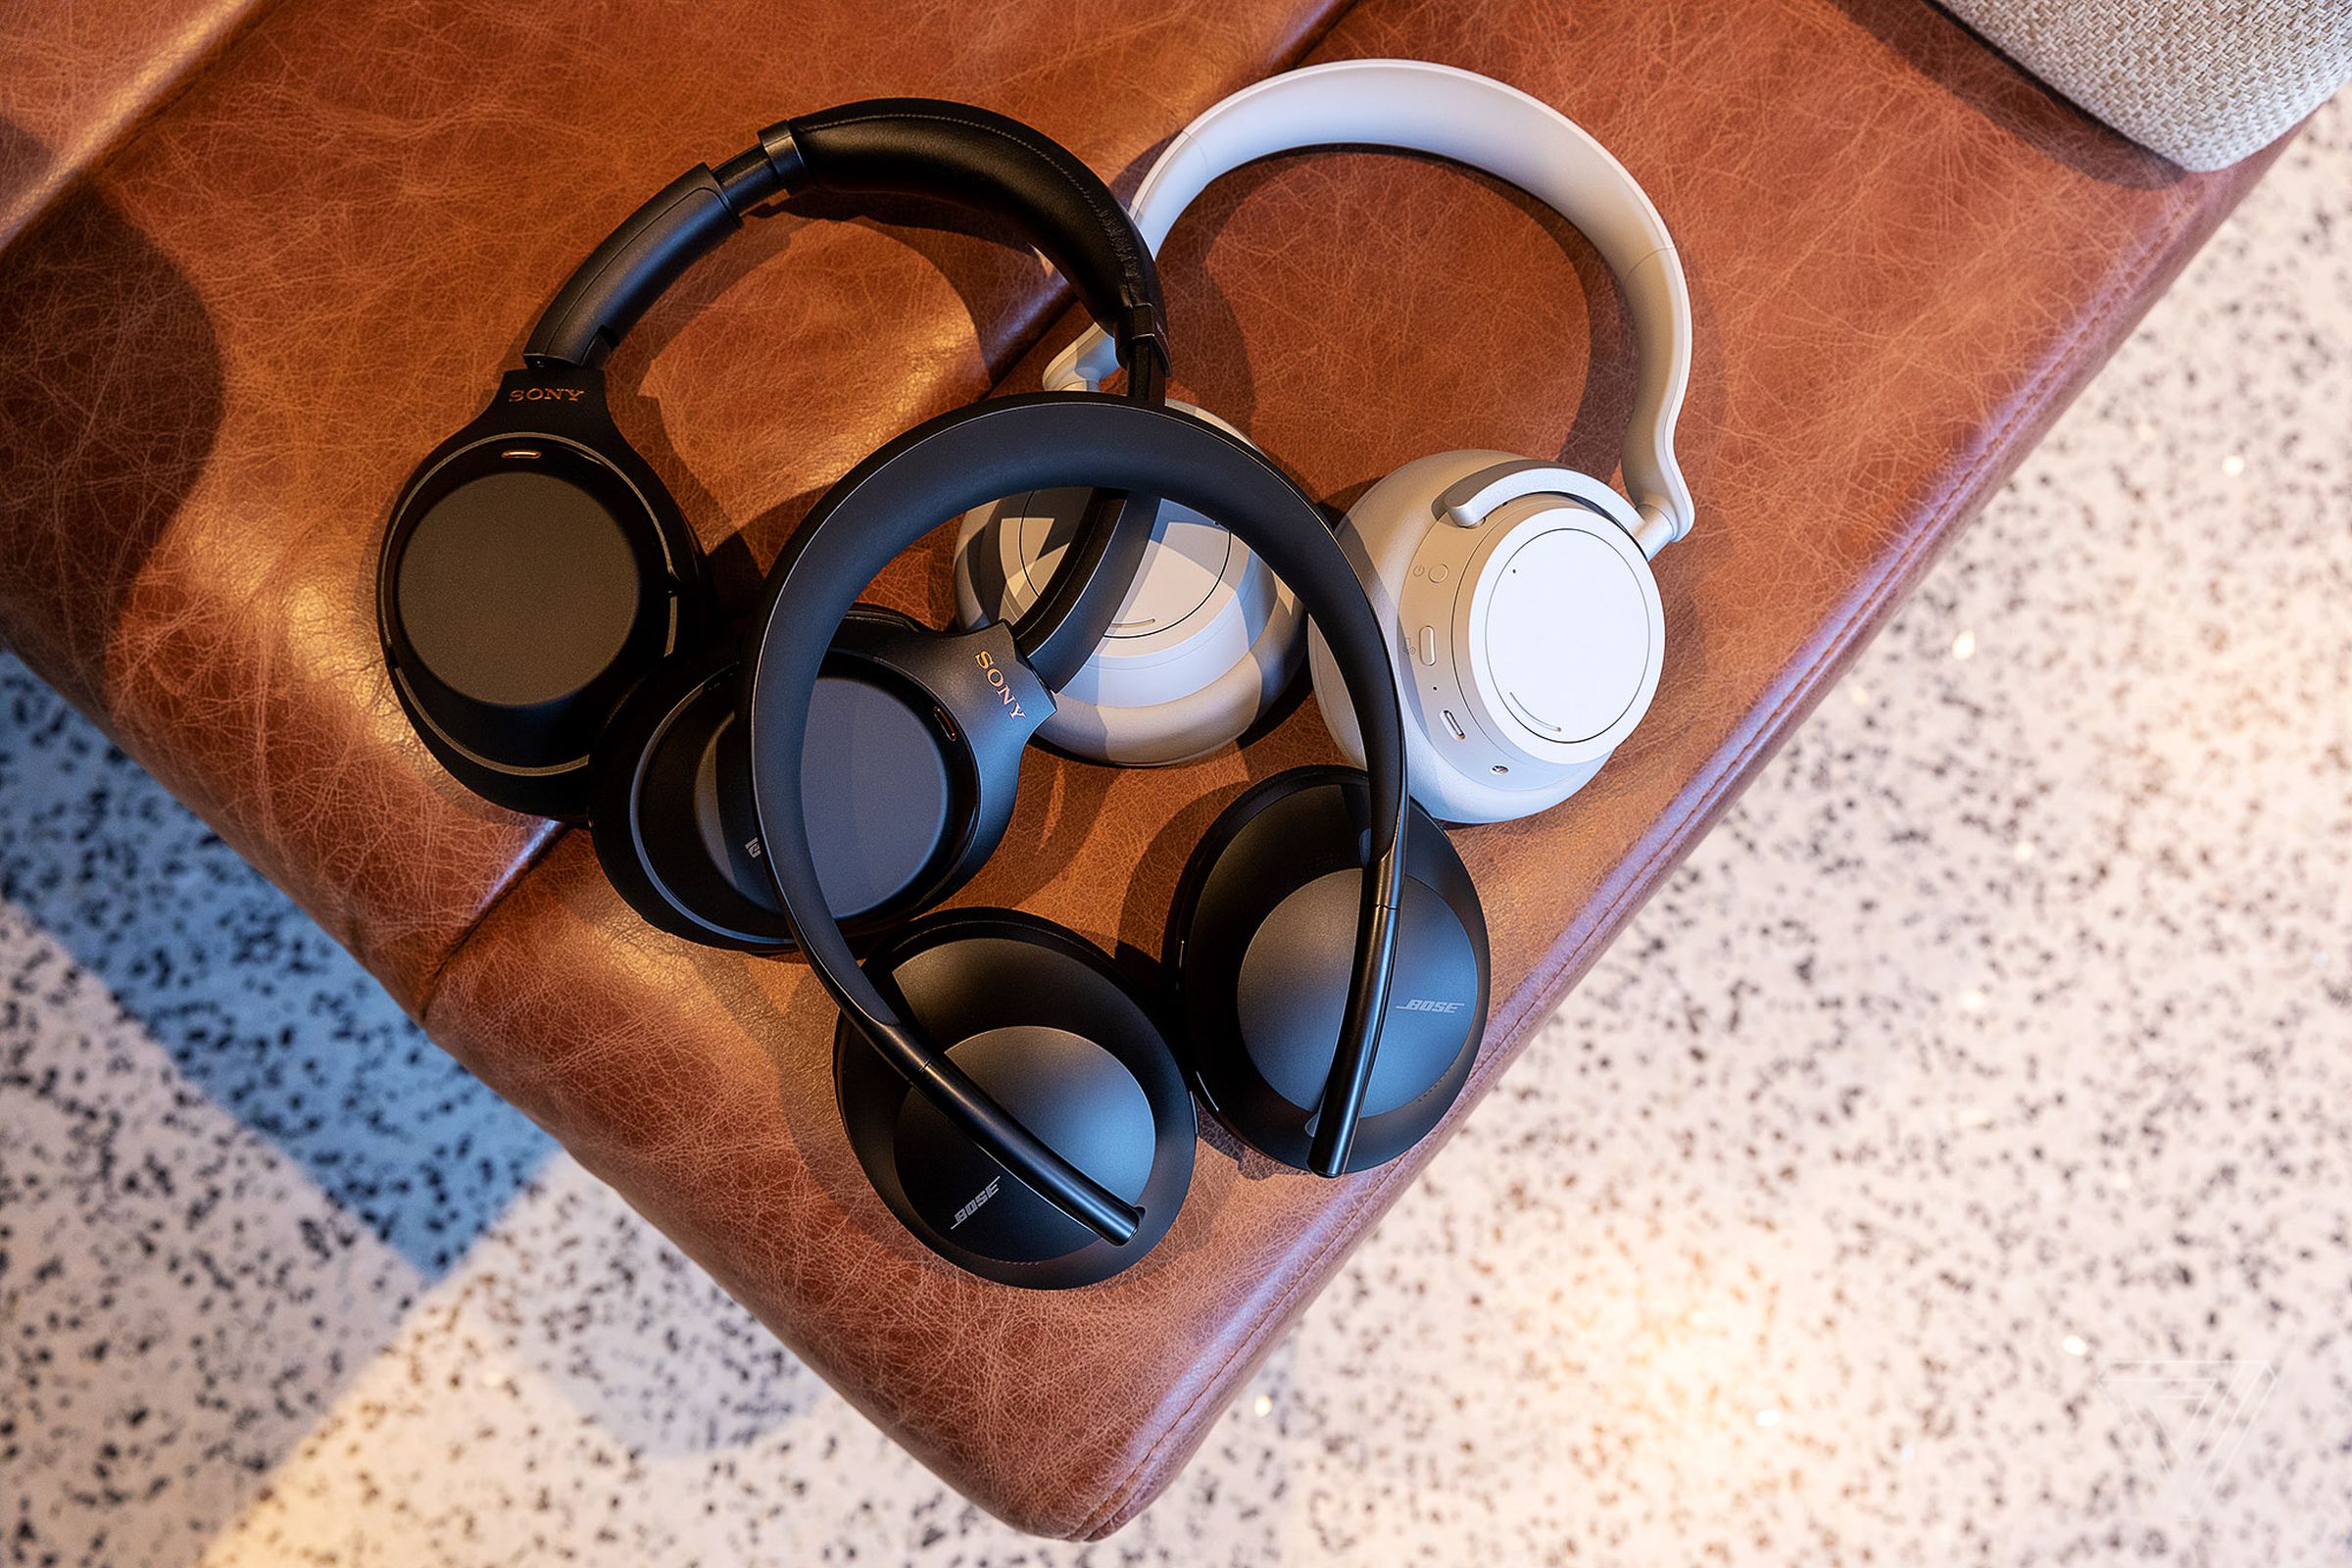 Bose’s Noise Cancelling Headphones 700 pictured with the Sony WH-1000XM3s and Microsoft’s Surface Headphones.